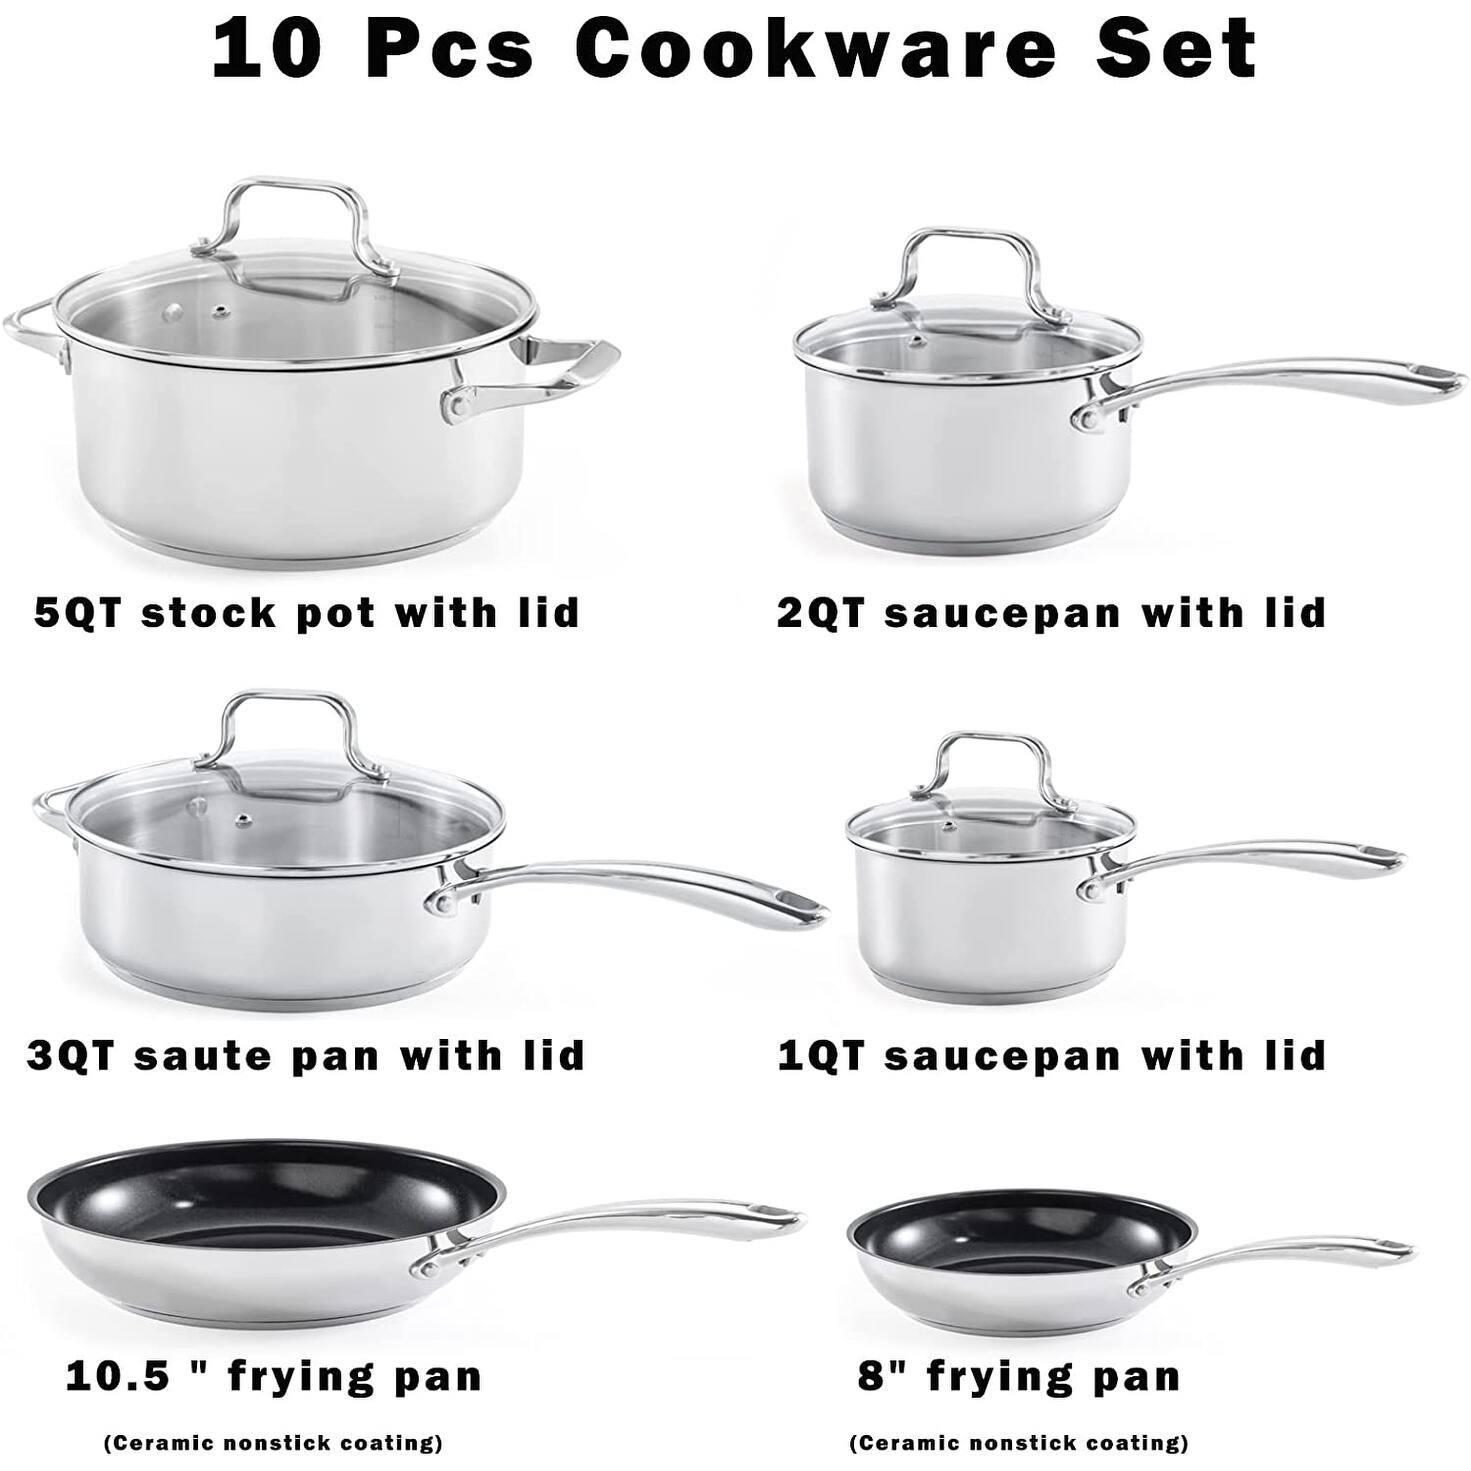 Stainless Steel Pots and Pans Set Ceramic Nonstick, 10 Pieces ...